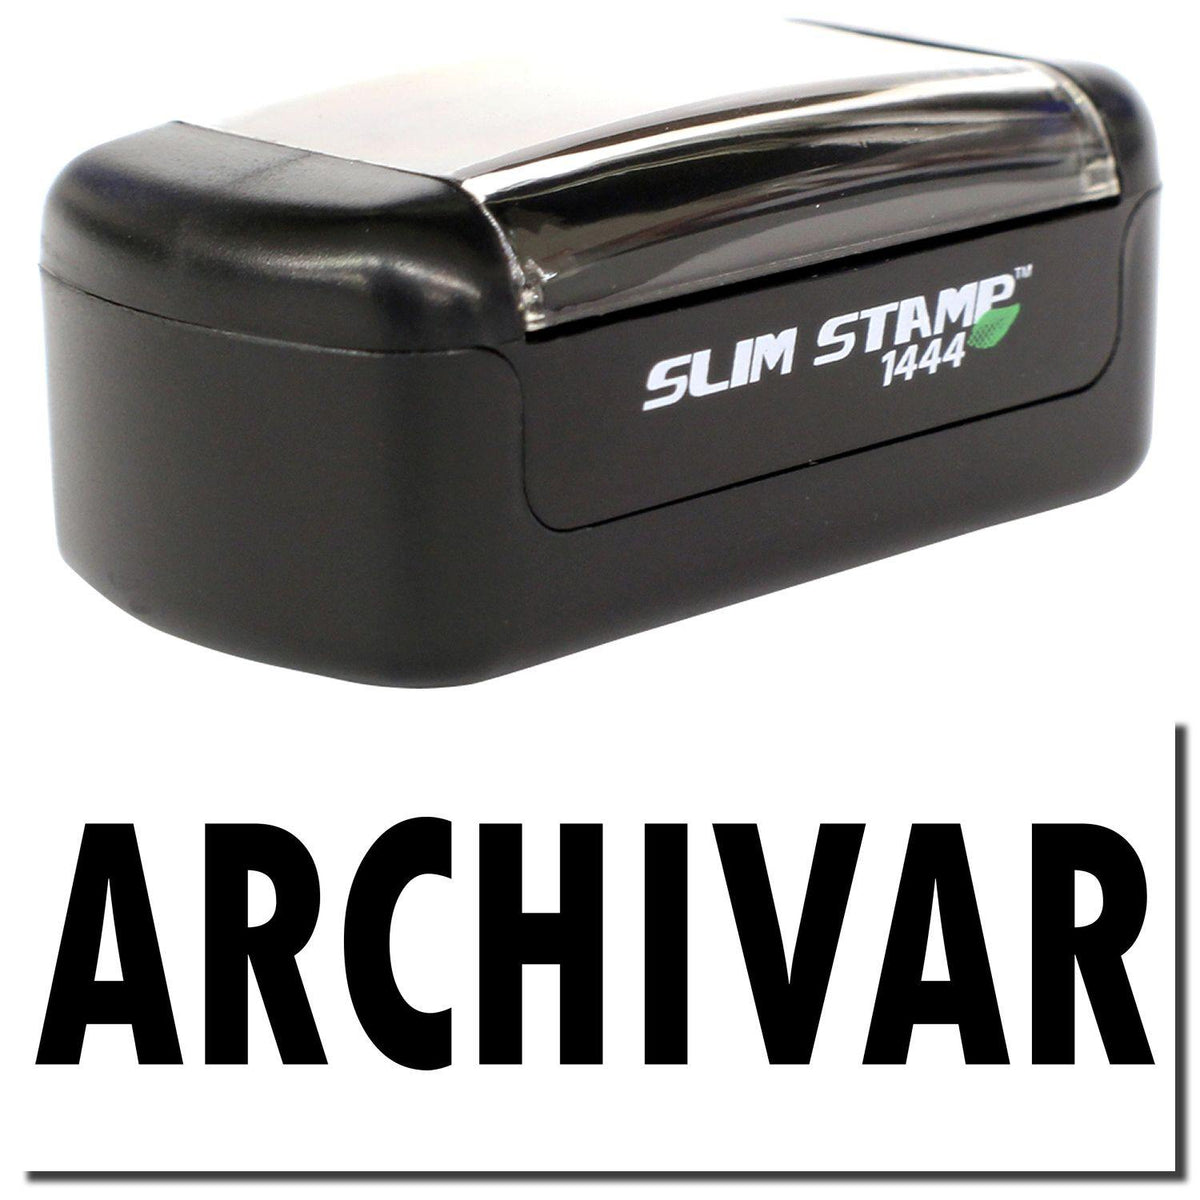 A stock office pre-inked stamp with a stamped image showing how the text &quot;ARCHIVAR&quot; is displayed after stamping.